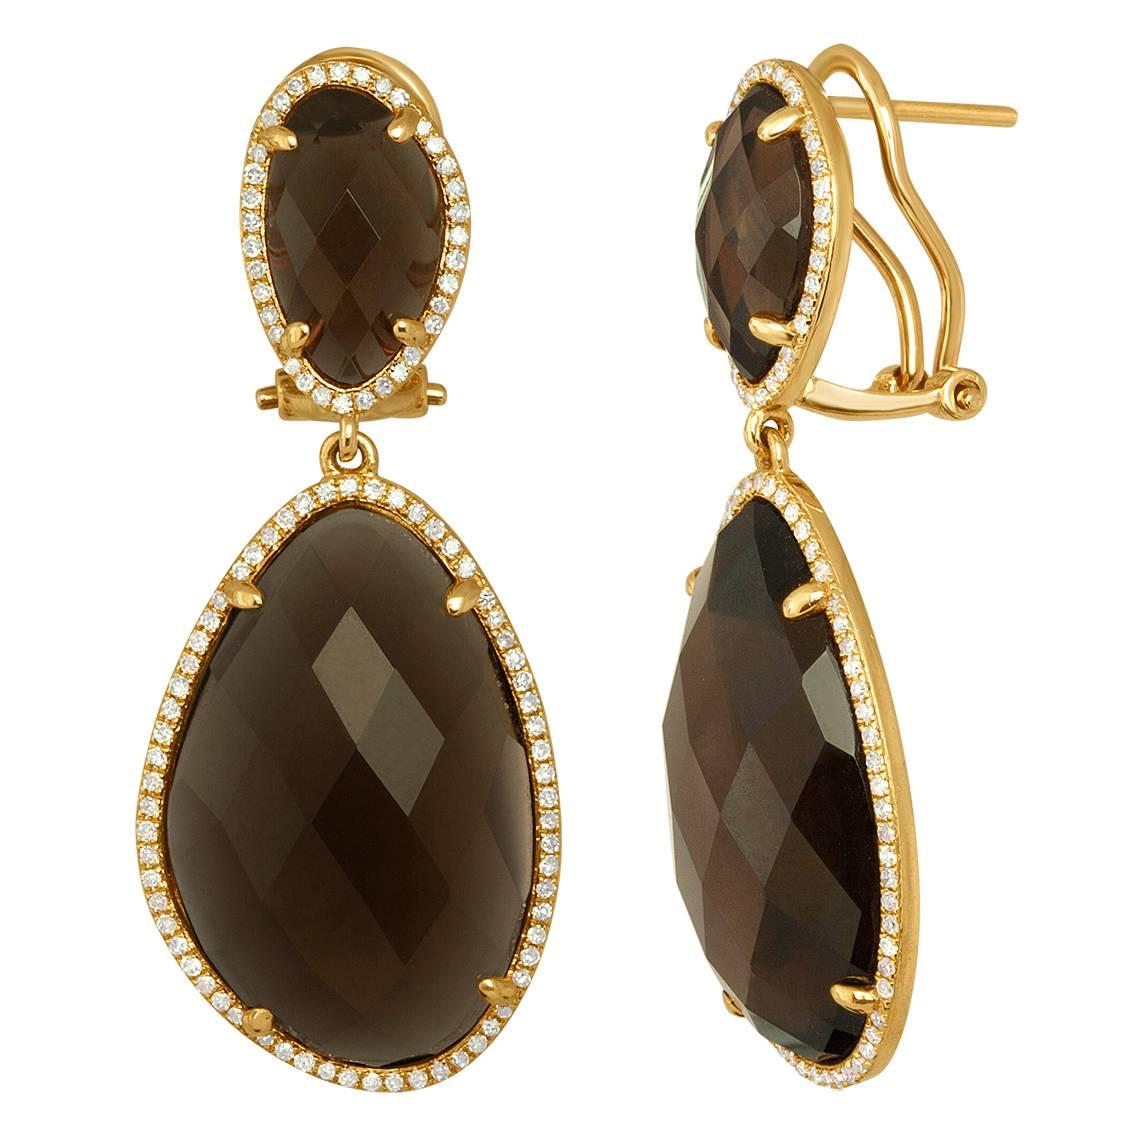 Details about   Smoky Topaz 18K Gold Plated 925 Sterling Silver Dangle Earrings Gemstone Jewelry 